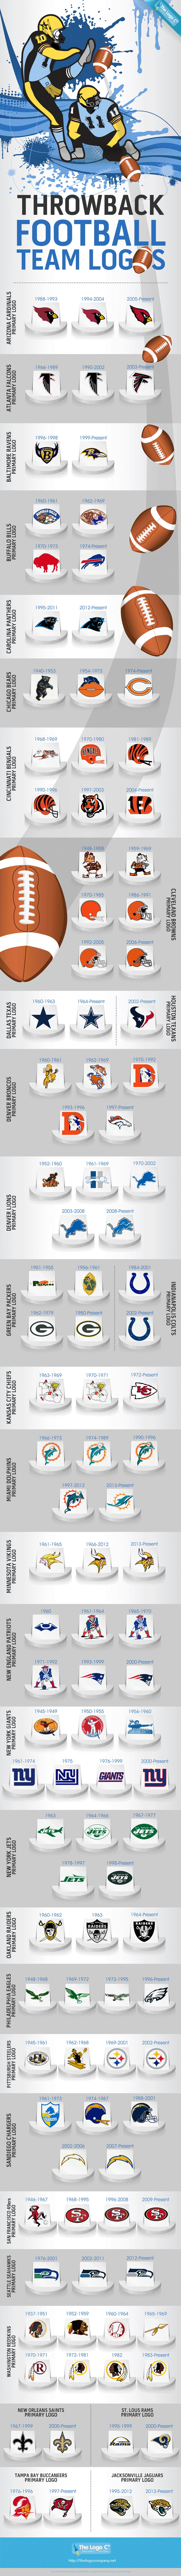 Infographic by The Logo Company of  Football logos and how they have evolved over the years. Logo changes are obvious for almost every team